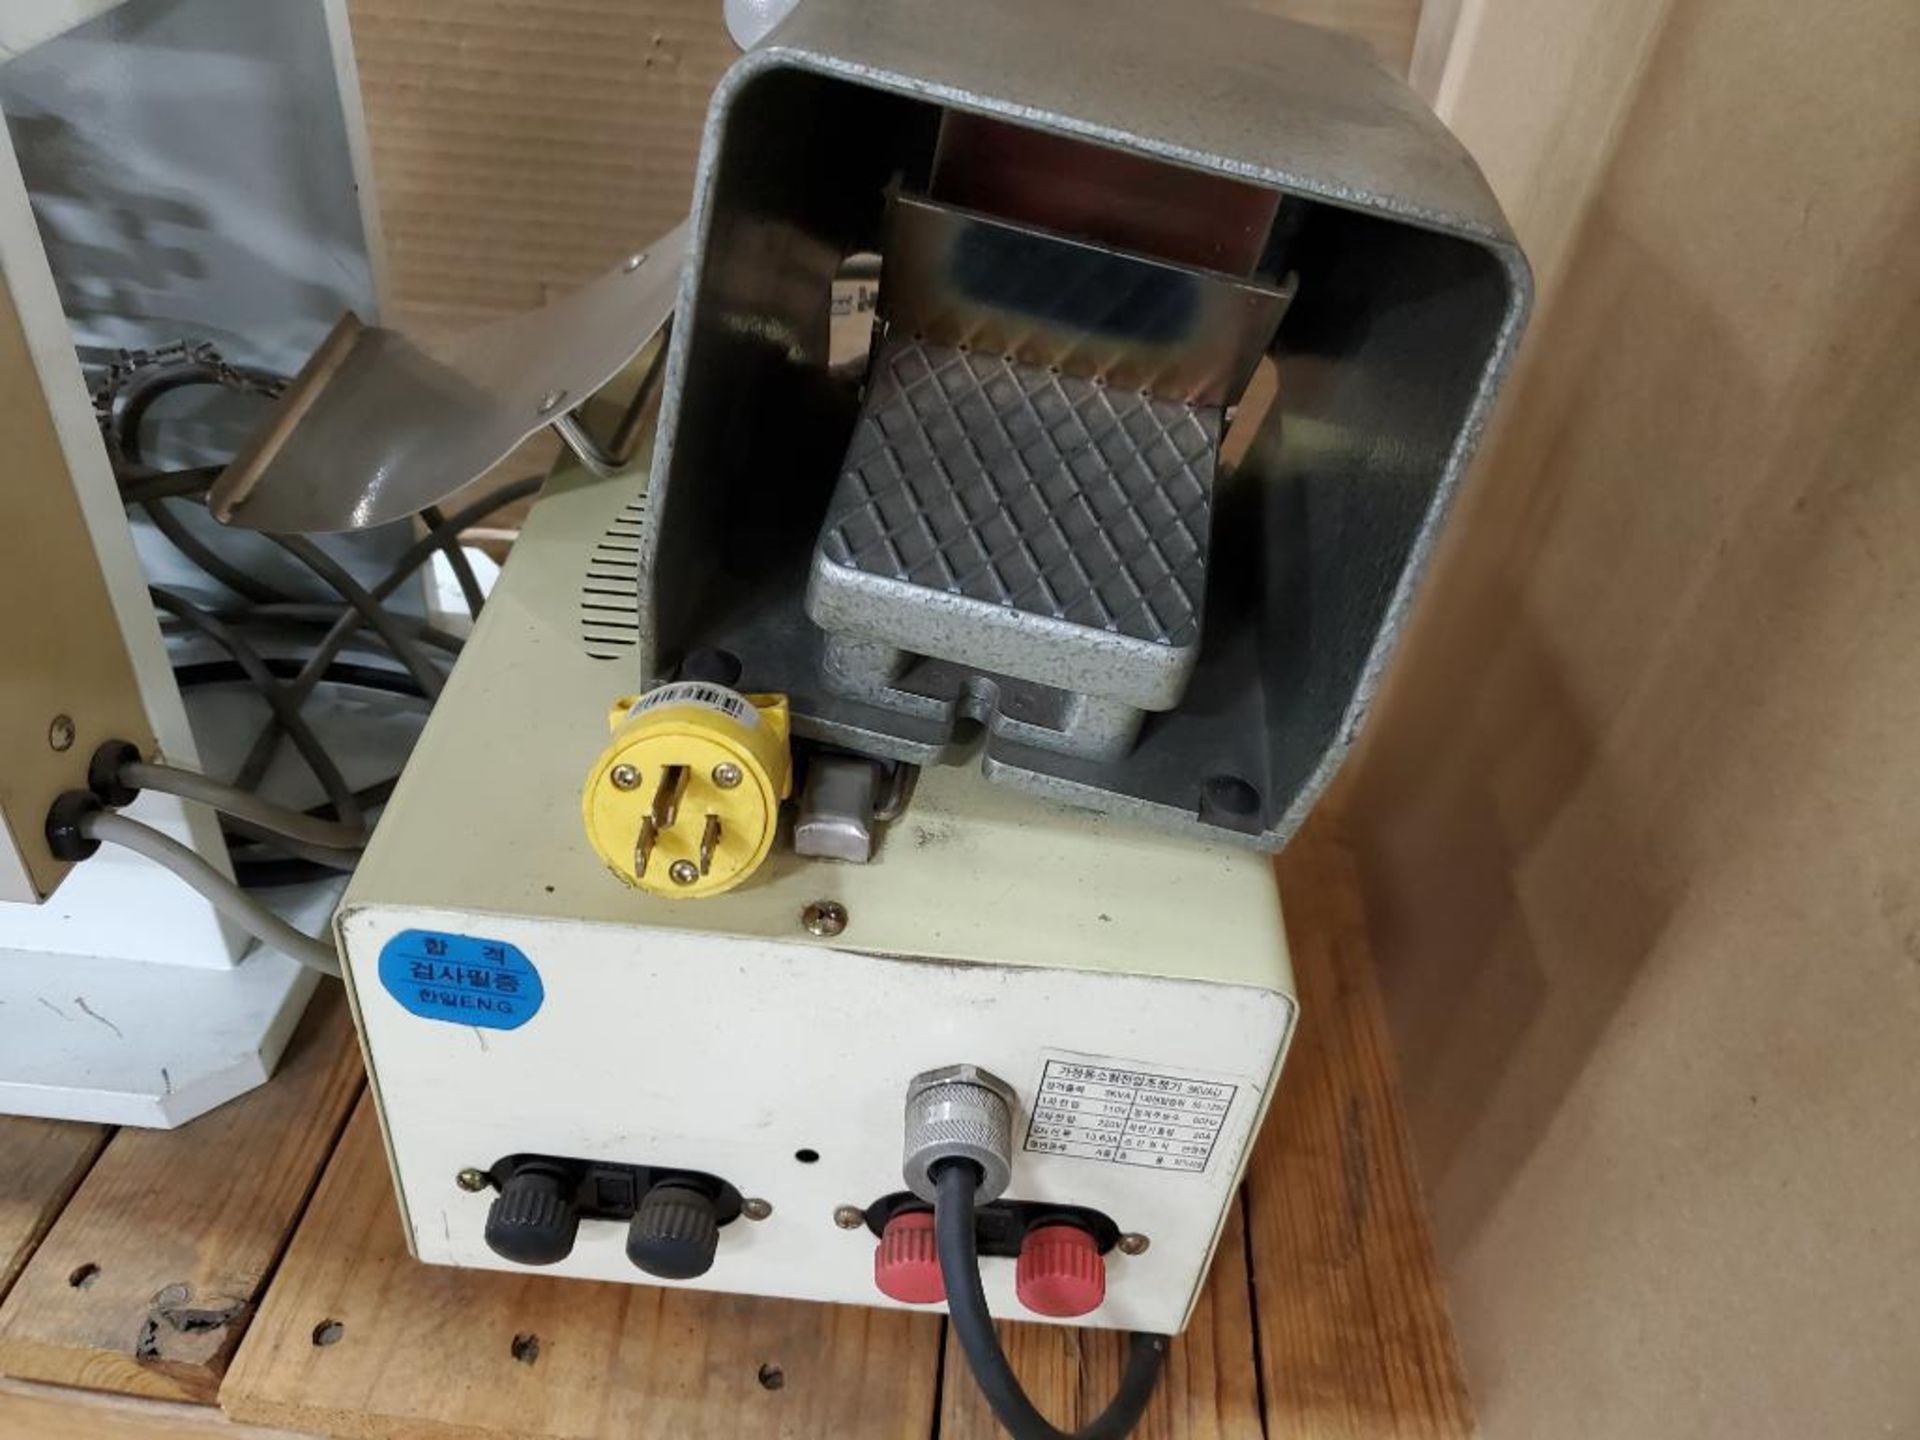 KM Digitech terminal crimping machine. Model KM-802N. Includes spade connector die as pictured. - Image 9 of 10